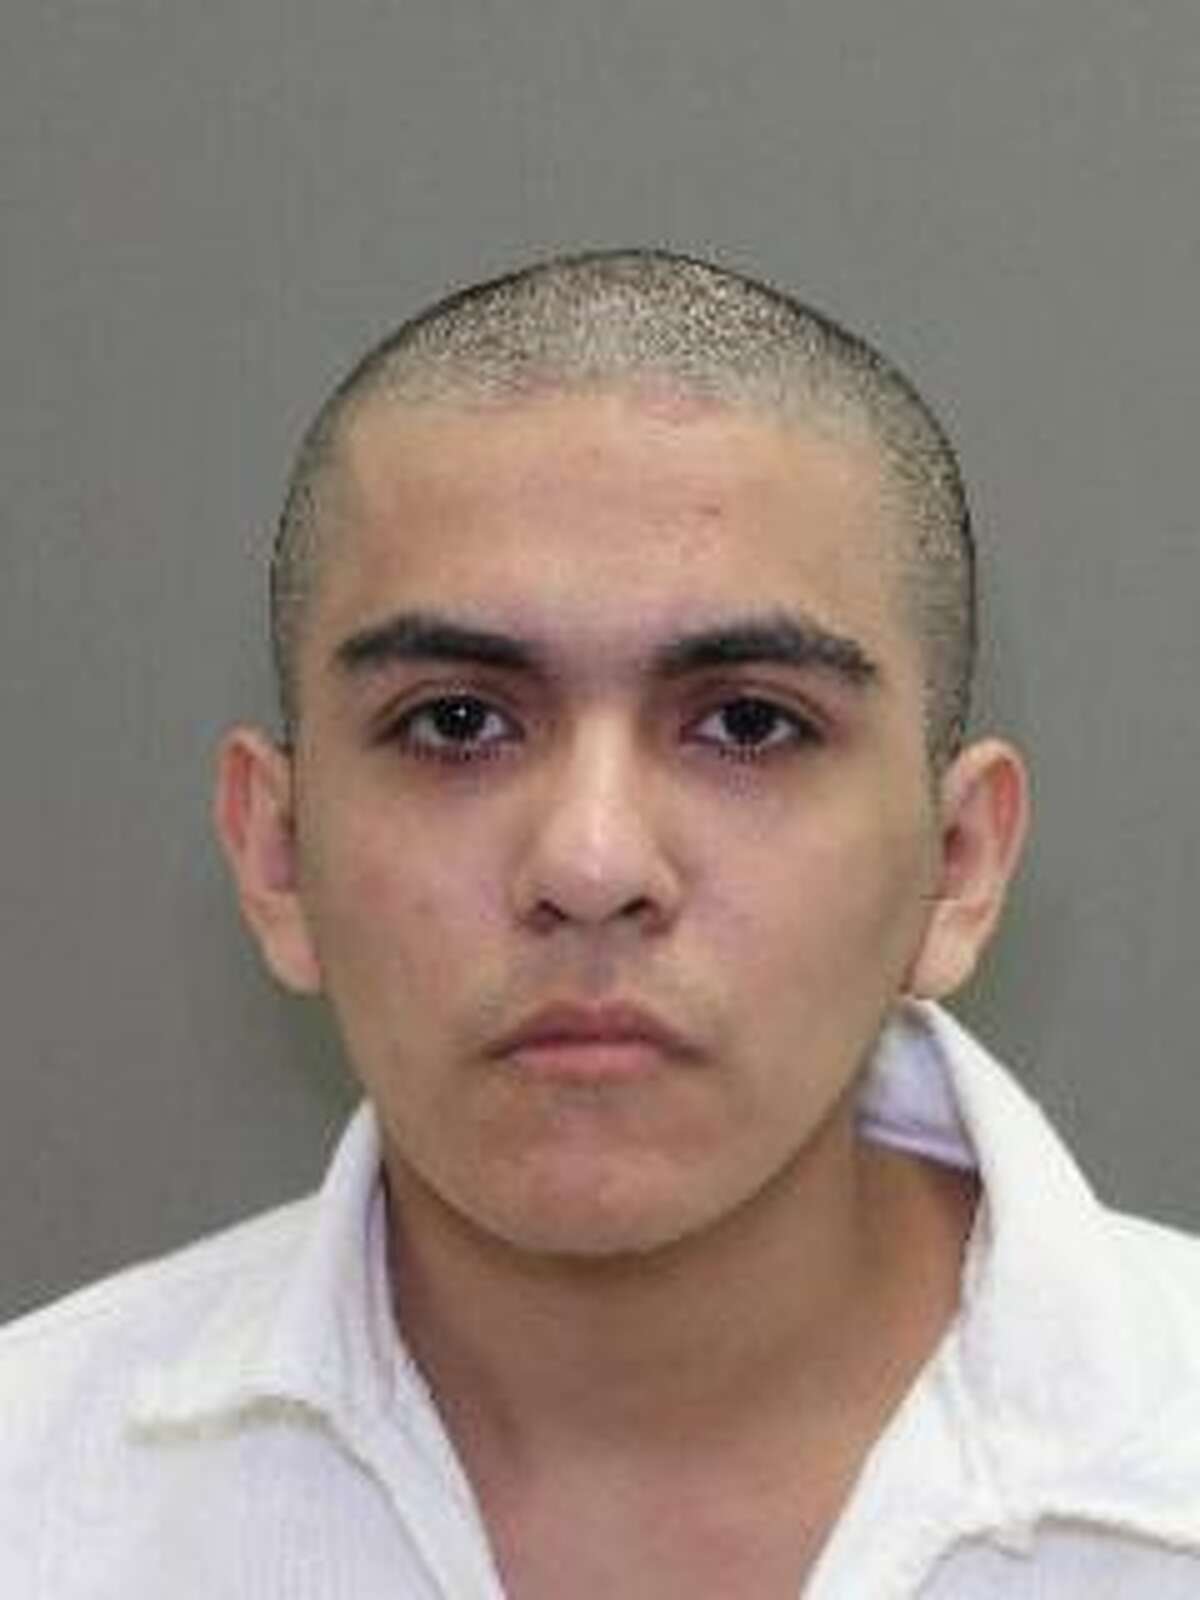 Miguel Carrera is shown here in early 2017, days before he pulled his eye out in a Texas prison after he was allegedly left unsupervised during a psychotic episode.